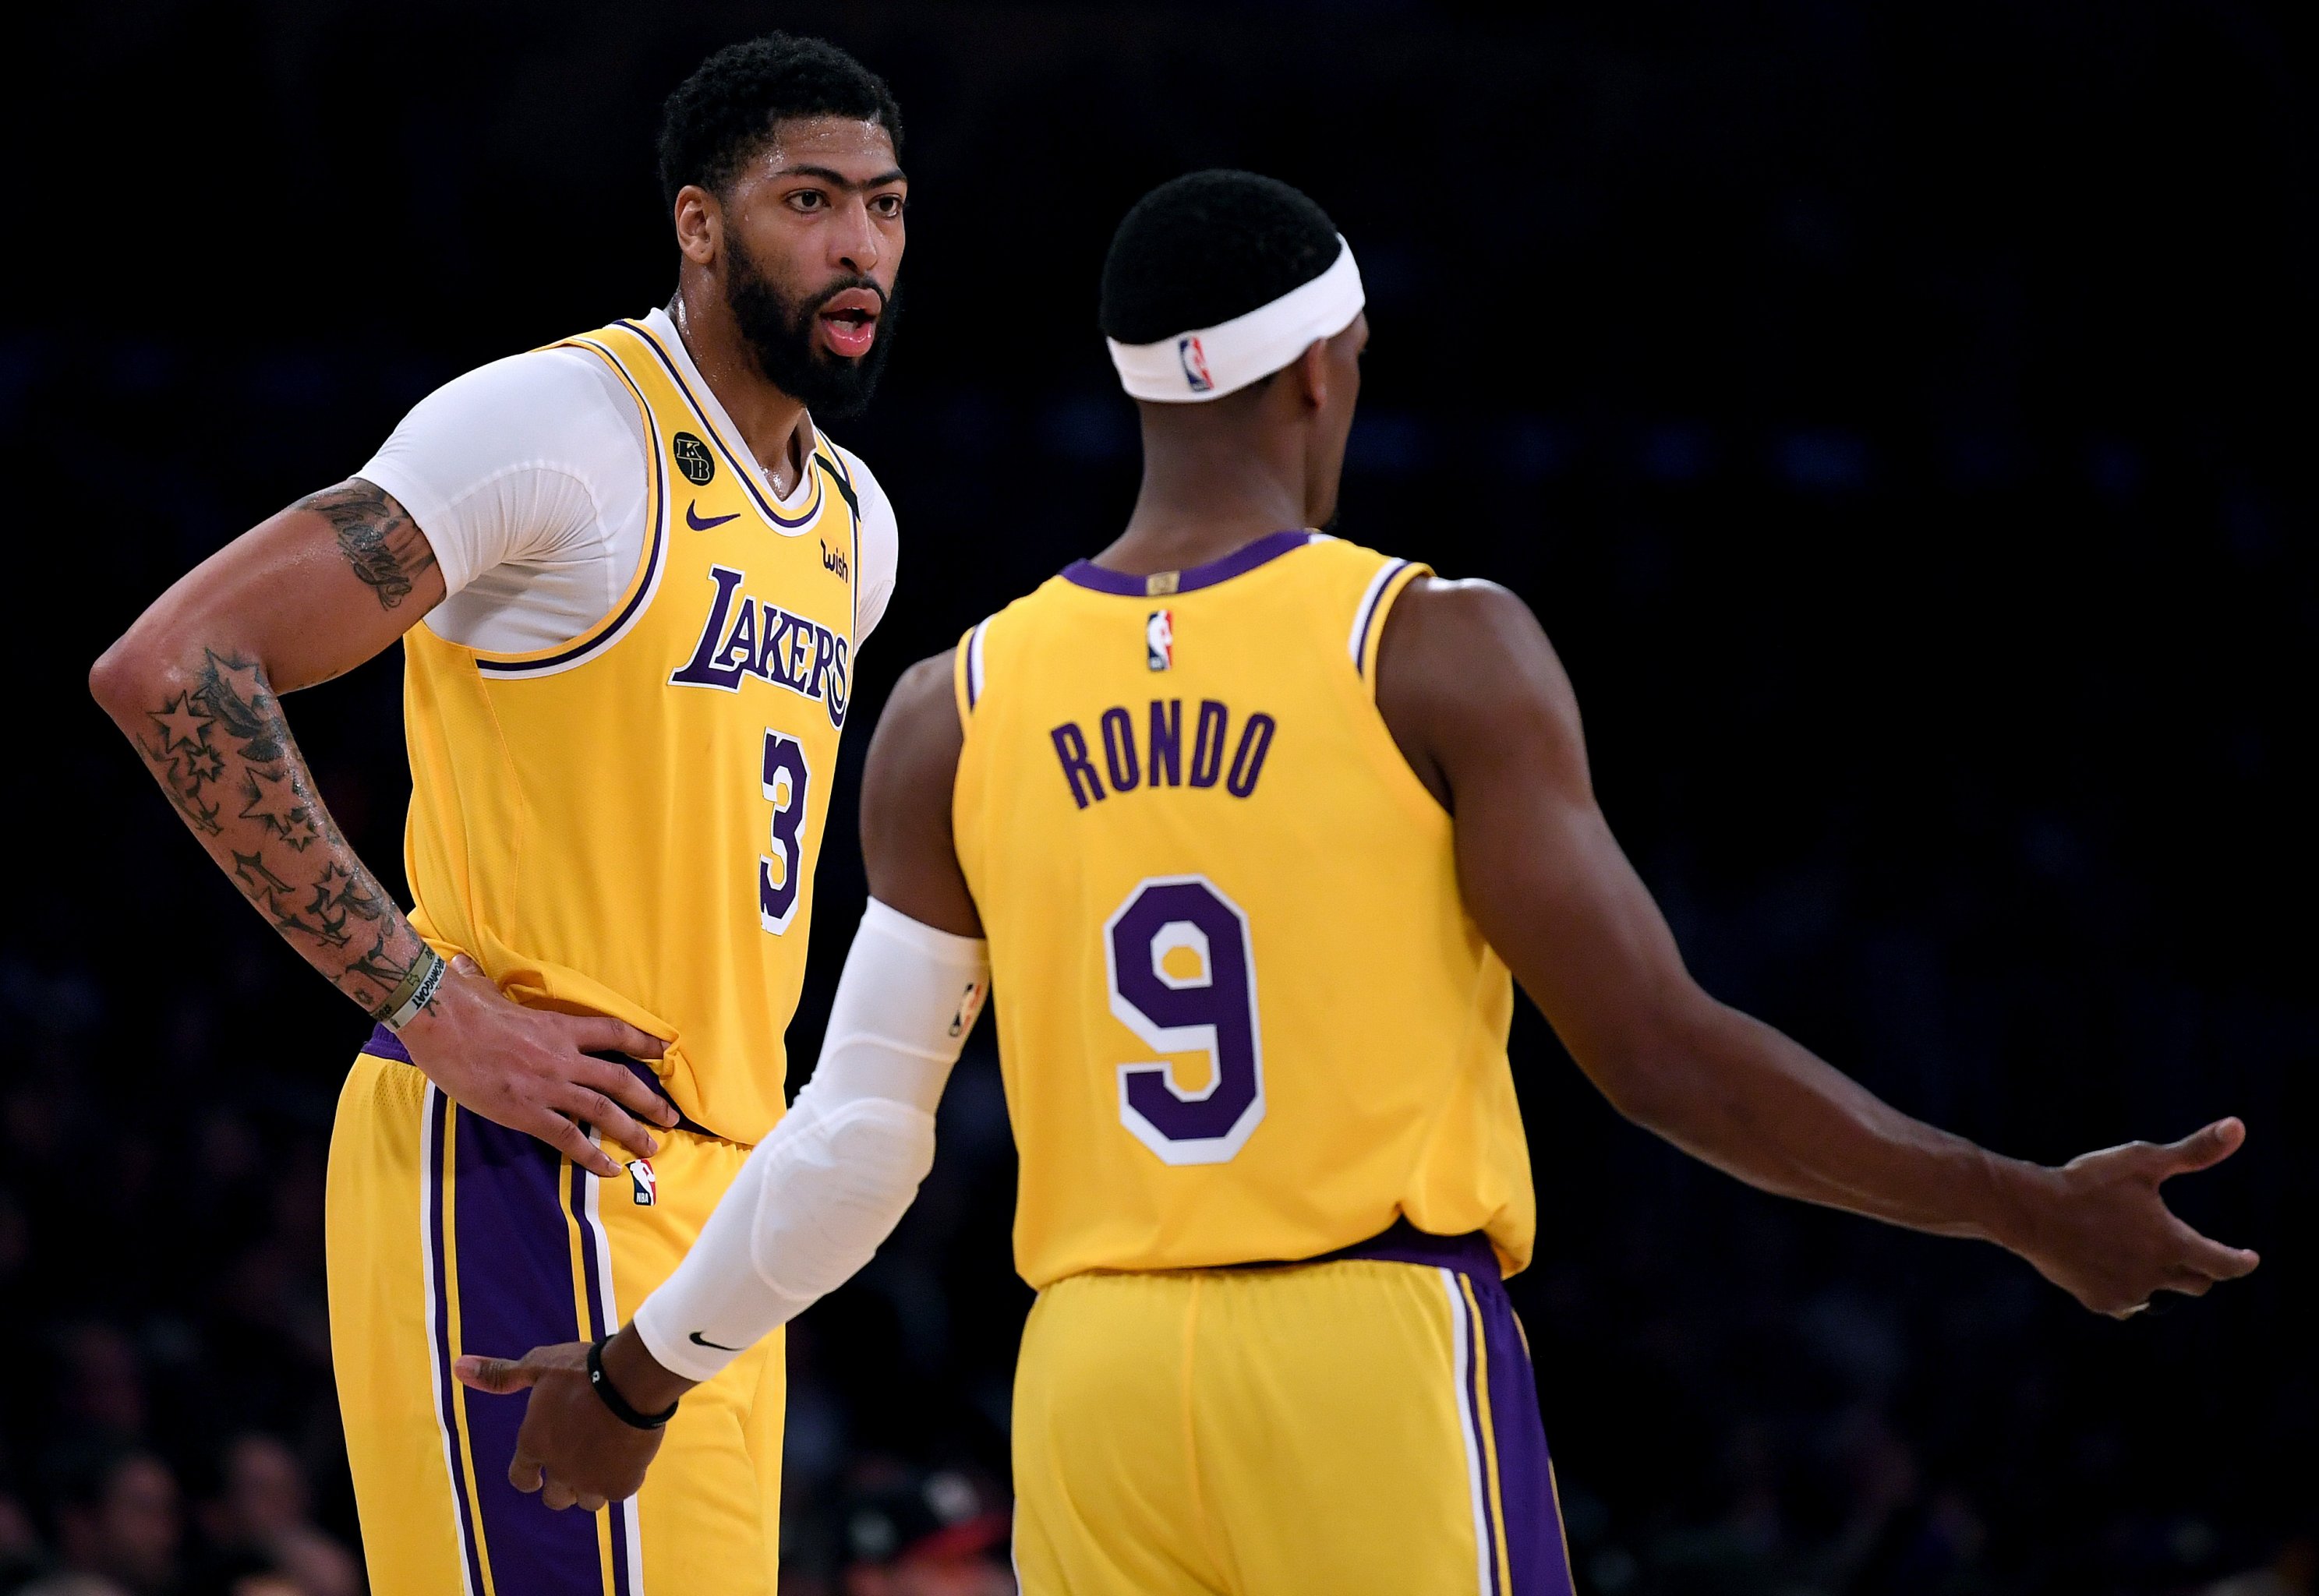 Report: Potential targets for Lakers this offseason include Jordan  Clarkson, Nerlens Noel and D.J. Augustin - Lakers Daily